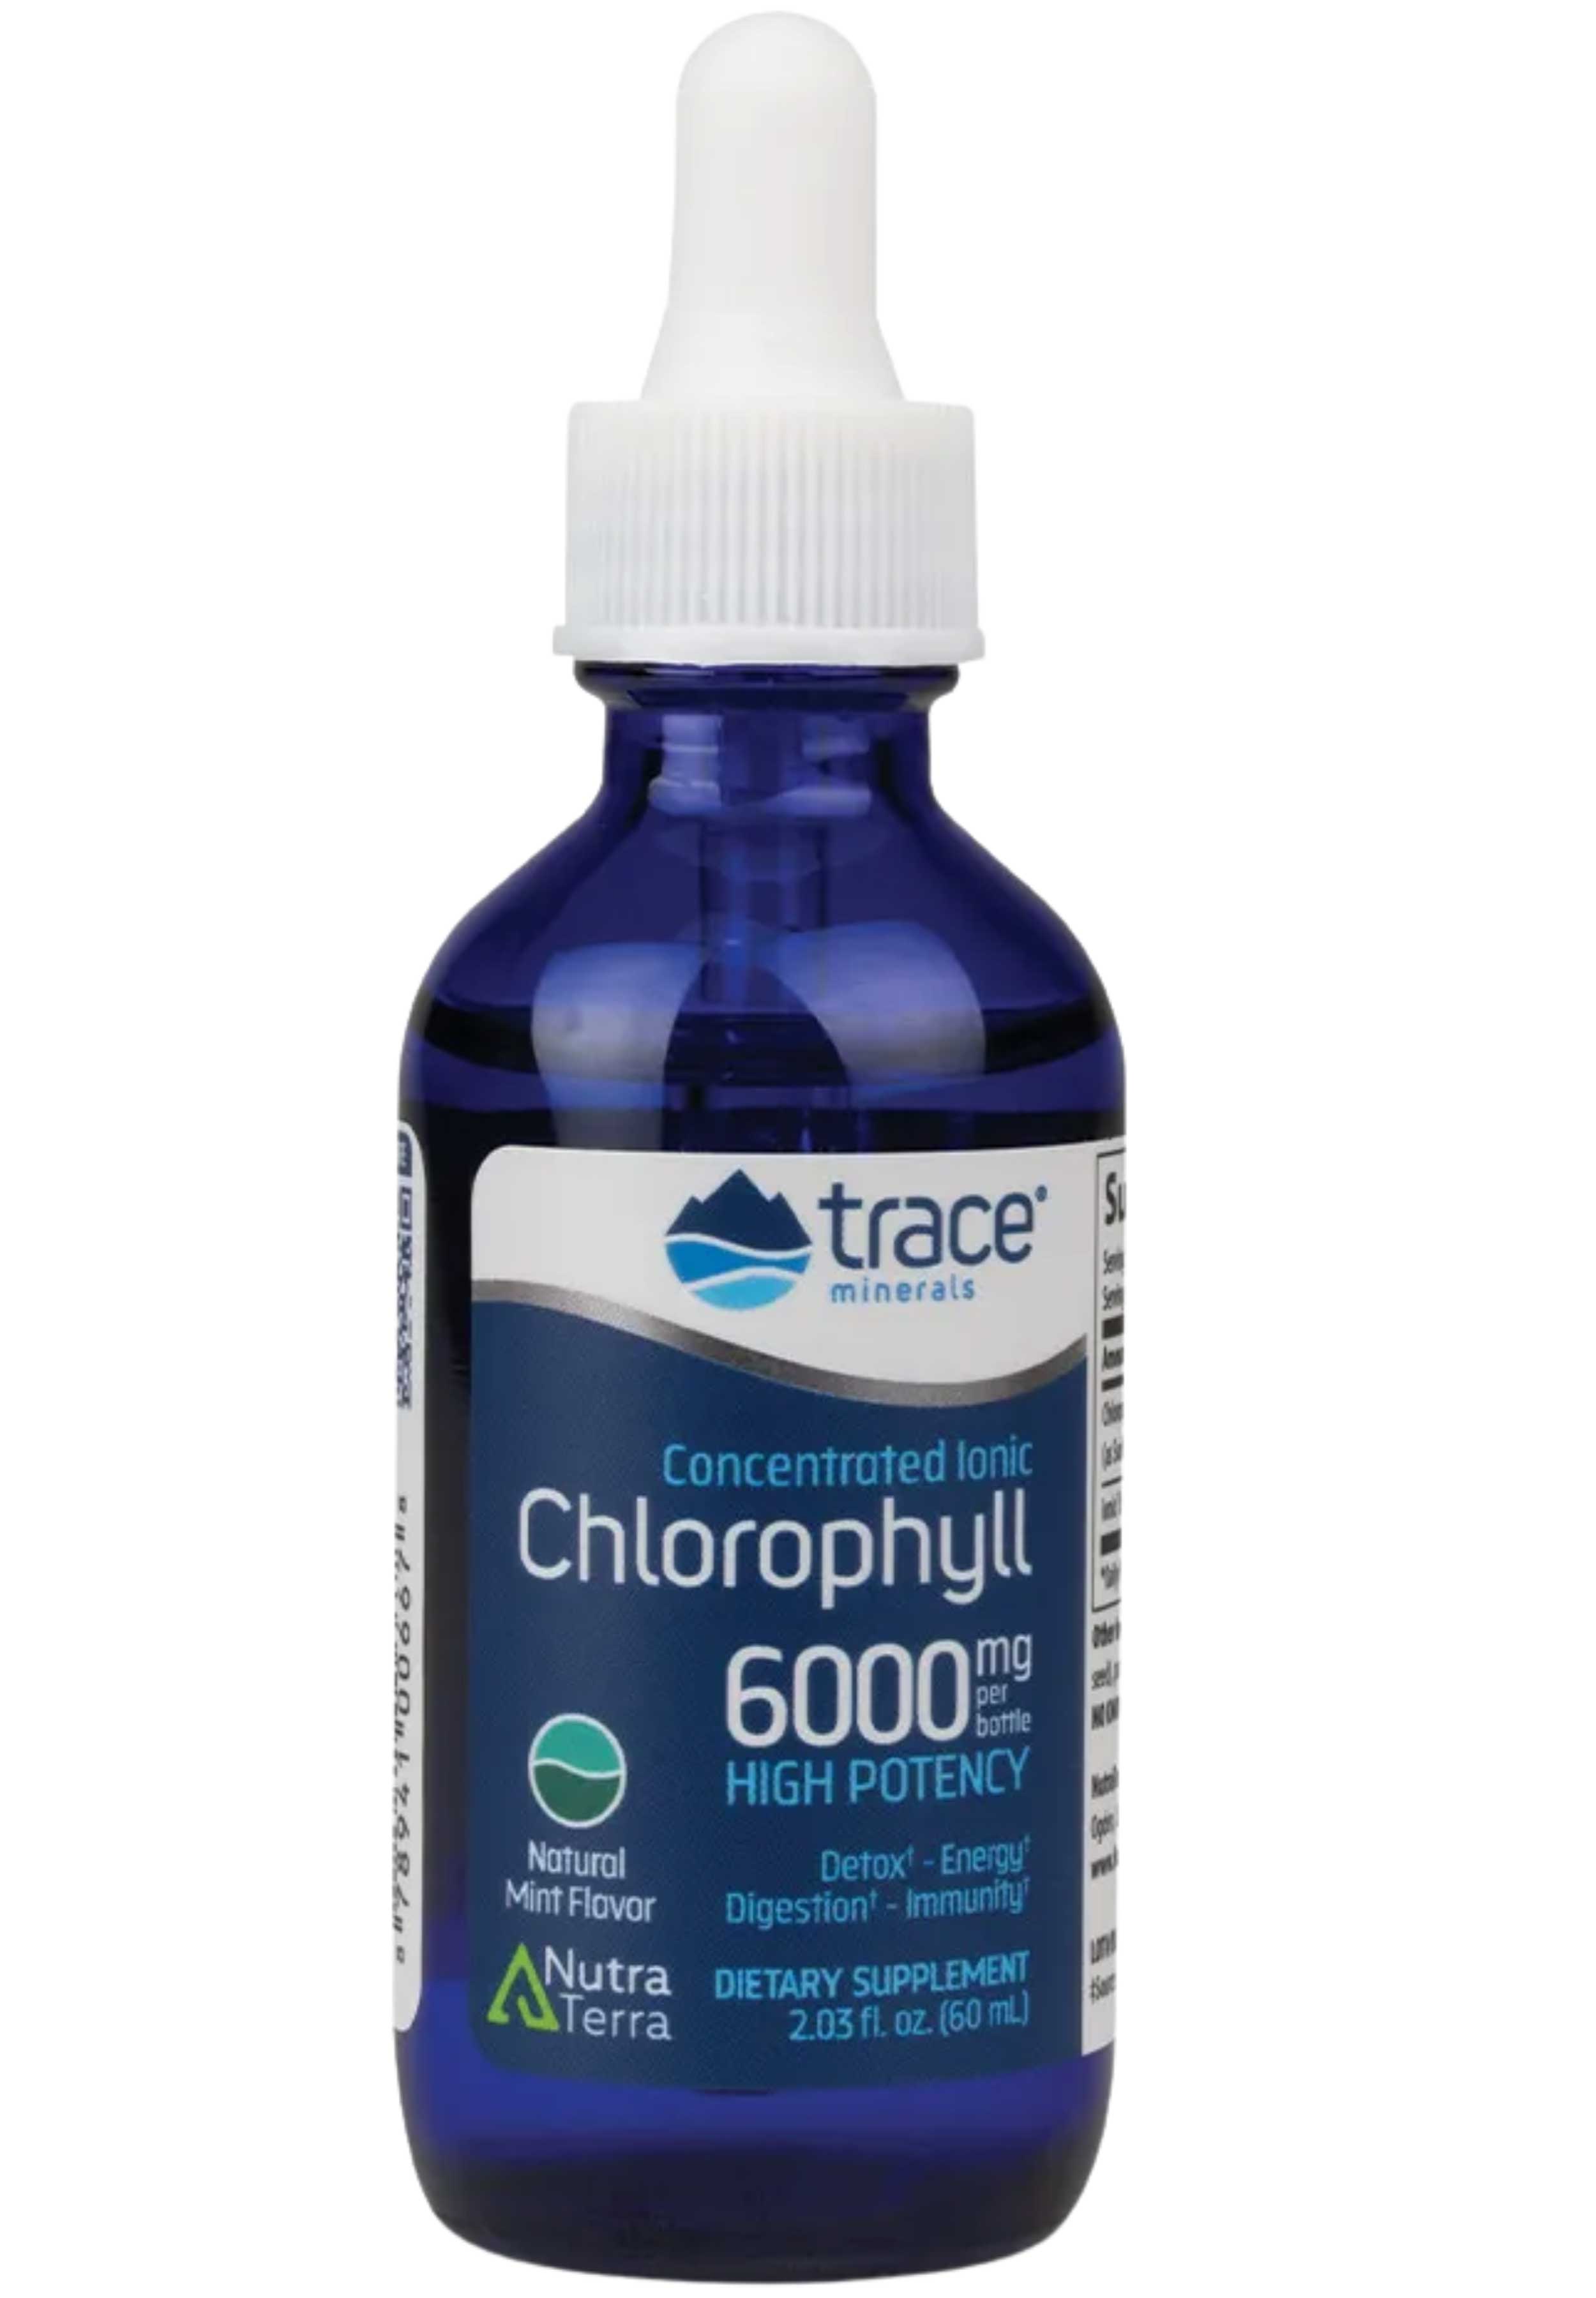 Trace Minerals Research Concentrated Ionic Chlorophyll High Potency 6000 mg